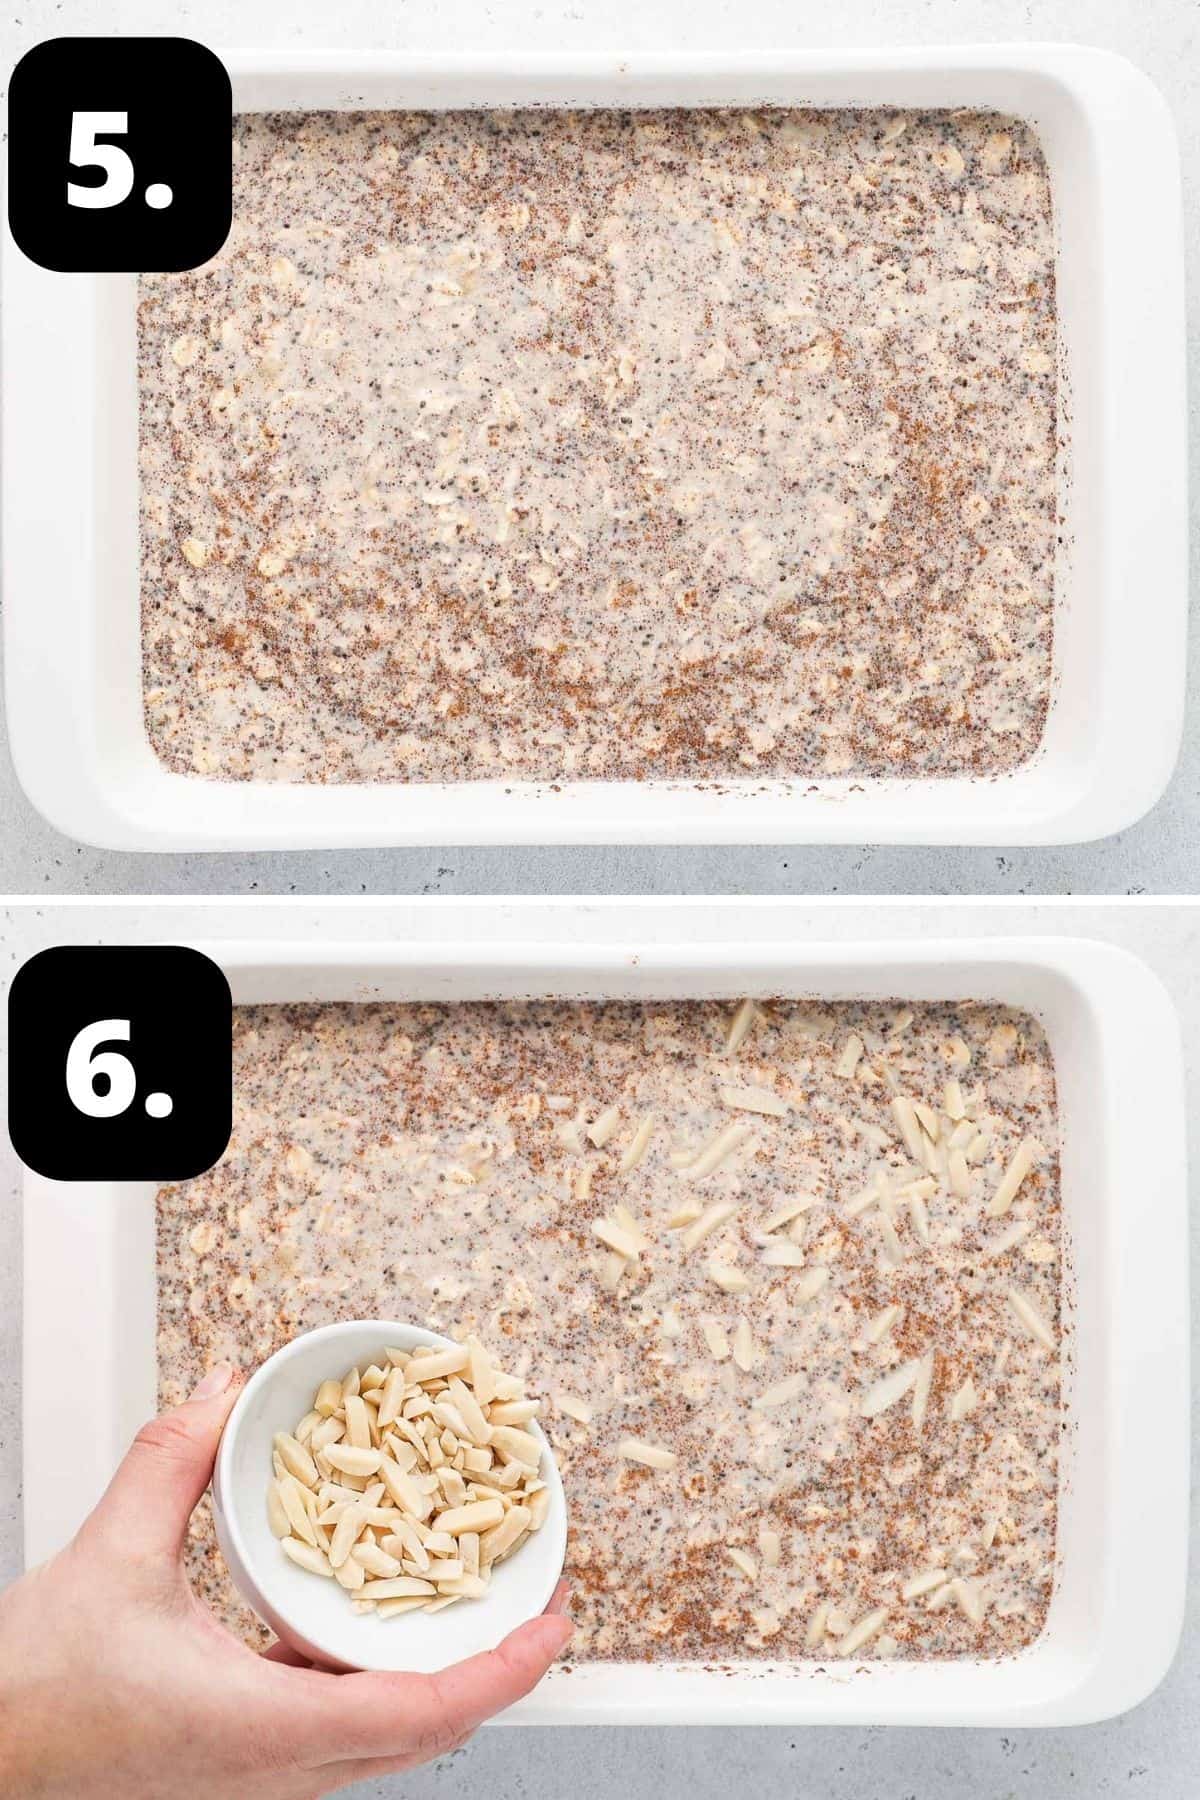 Steps 5-6 of preparing this recipe - the mixture in the baking dish and sprinkling the top with slivered almonds.